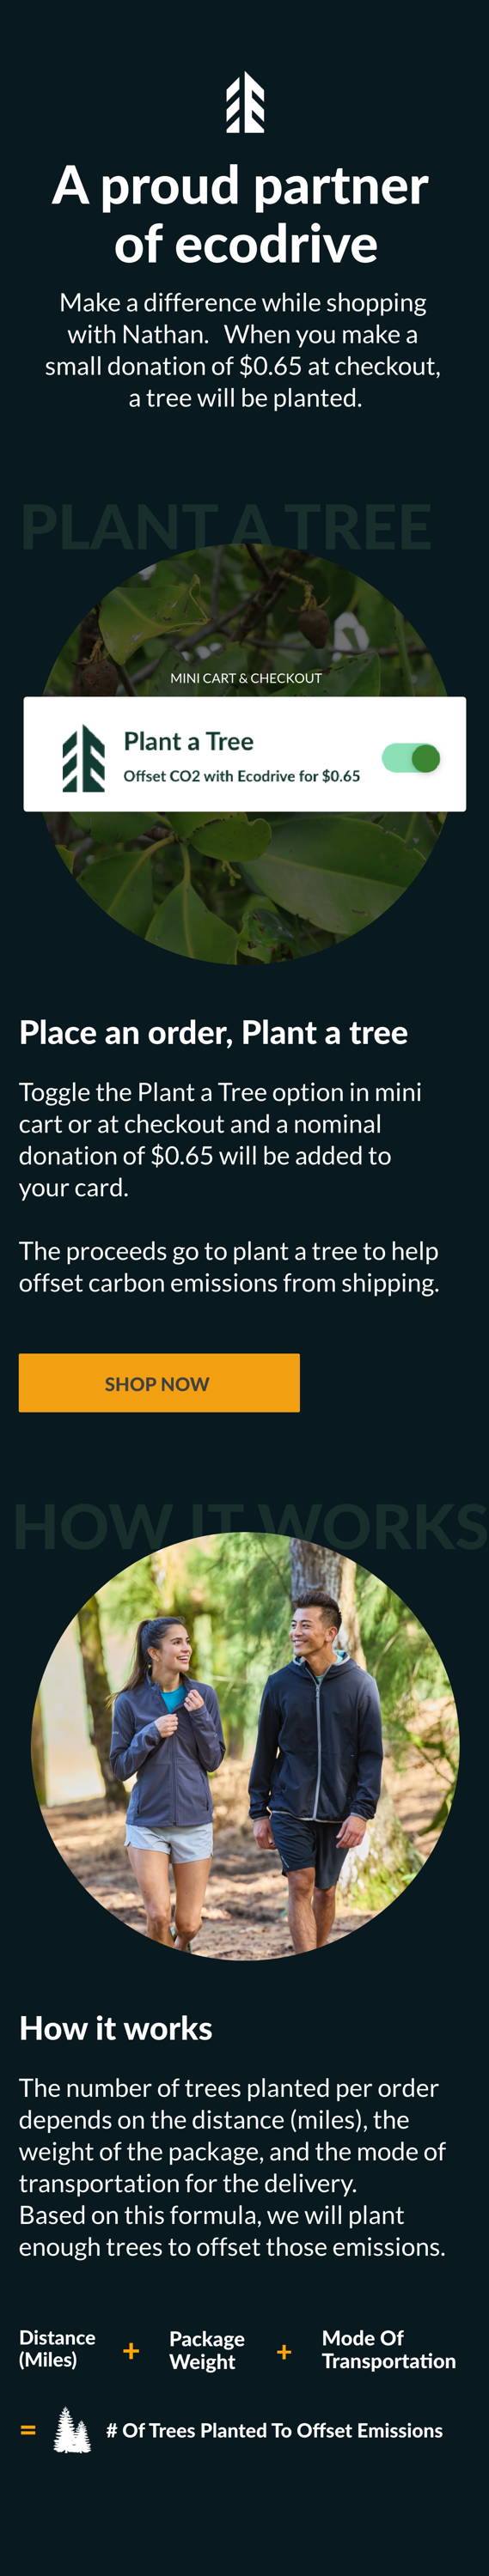 A proud partner of ecodrive We now offer every customer a chance to make a difference while shopping with Nathan. You can plant a tree with a small donation of $0.65 at checkout. Shop Now.  Place an order, Plant a tree In mini cart or at checkout, toggle the Plant a Tree option (if the image of the plant a tree toggle can be incorporated that'd be great!) Small donation of $0.65 will be added to your cart Proceeds go to plant a tree to help offset carbon emissions from shipping. How it works The number of trees planted per order depends on the distance (miles), the weight of the package, and the mode of transportation for the delivery. Based on this formula, we will plant enough trees to offset those emissions.  Distance (Miles) + Package weight + Mode of Transportation = # of Trees planted to offset emissions